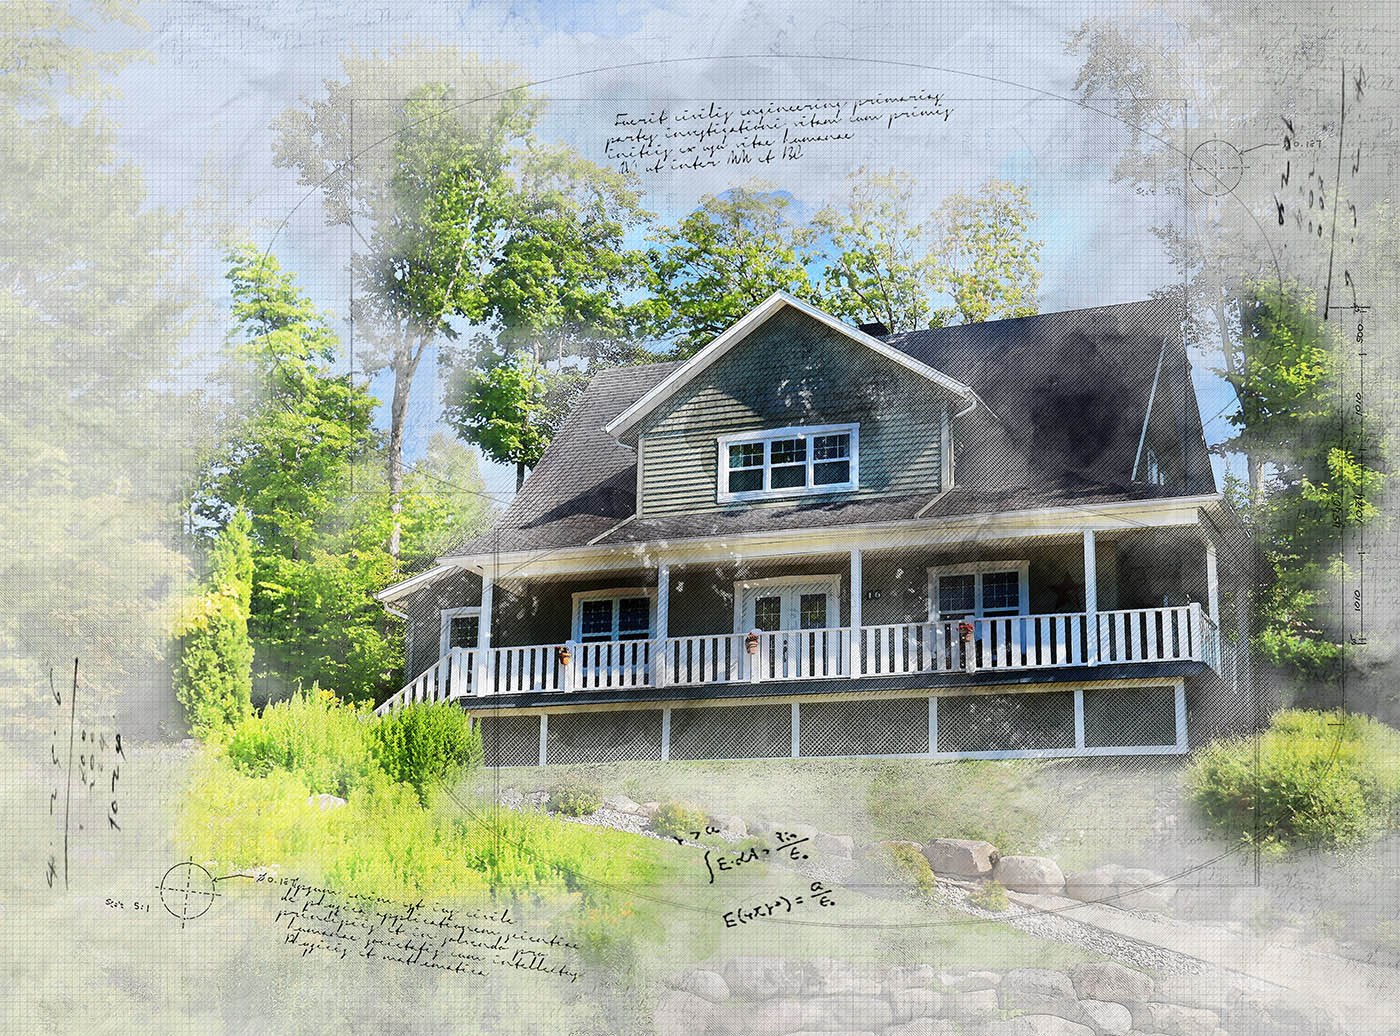 Beautiful Country House Sketch Image